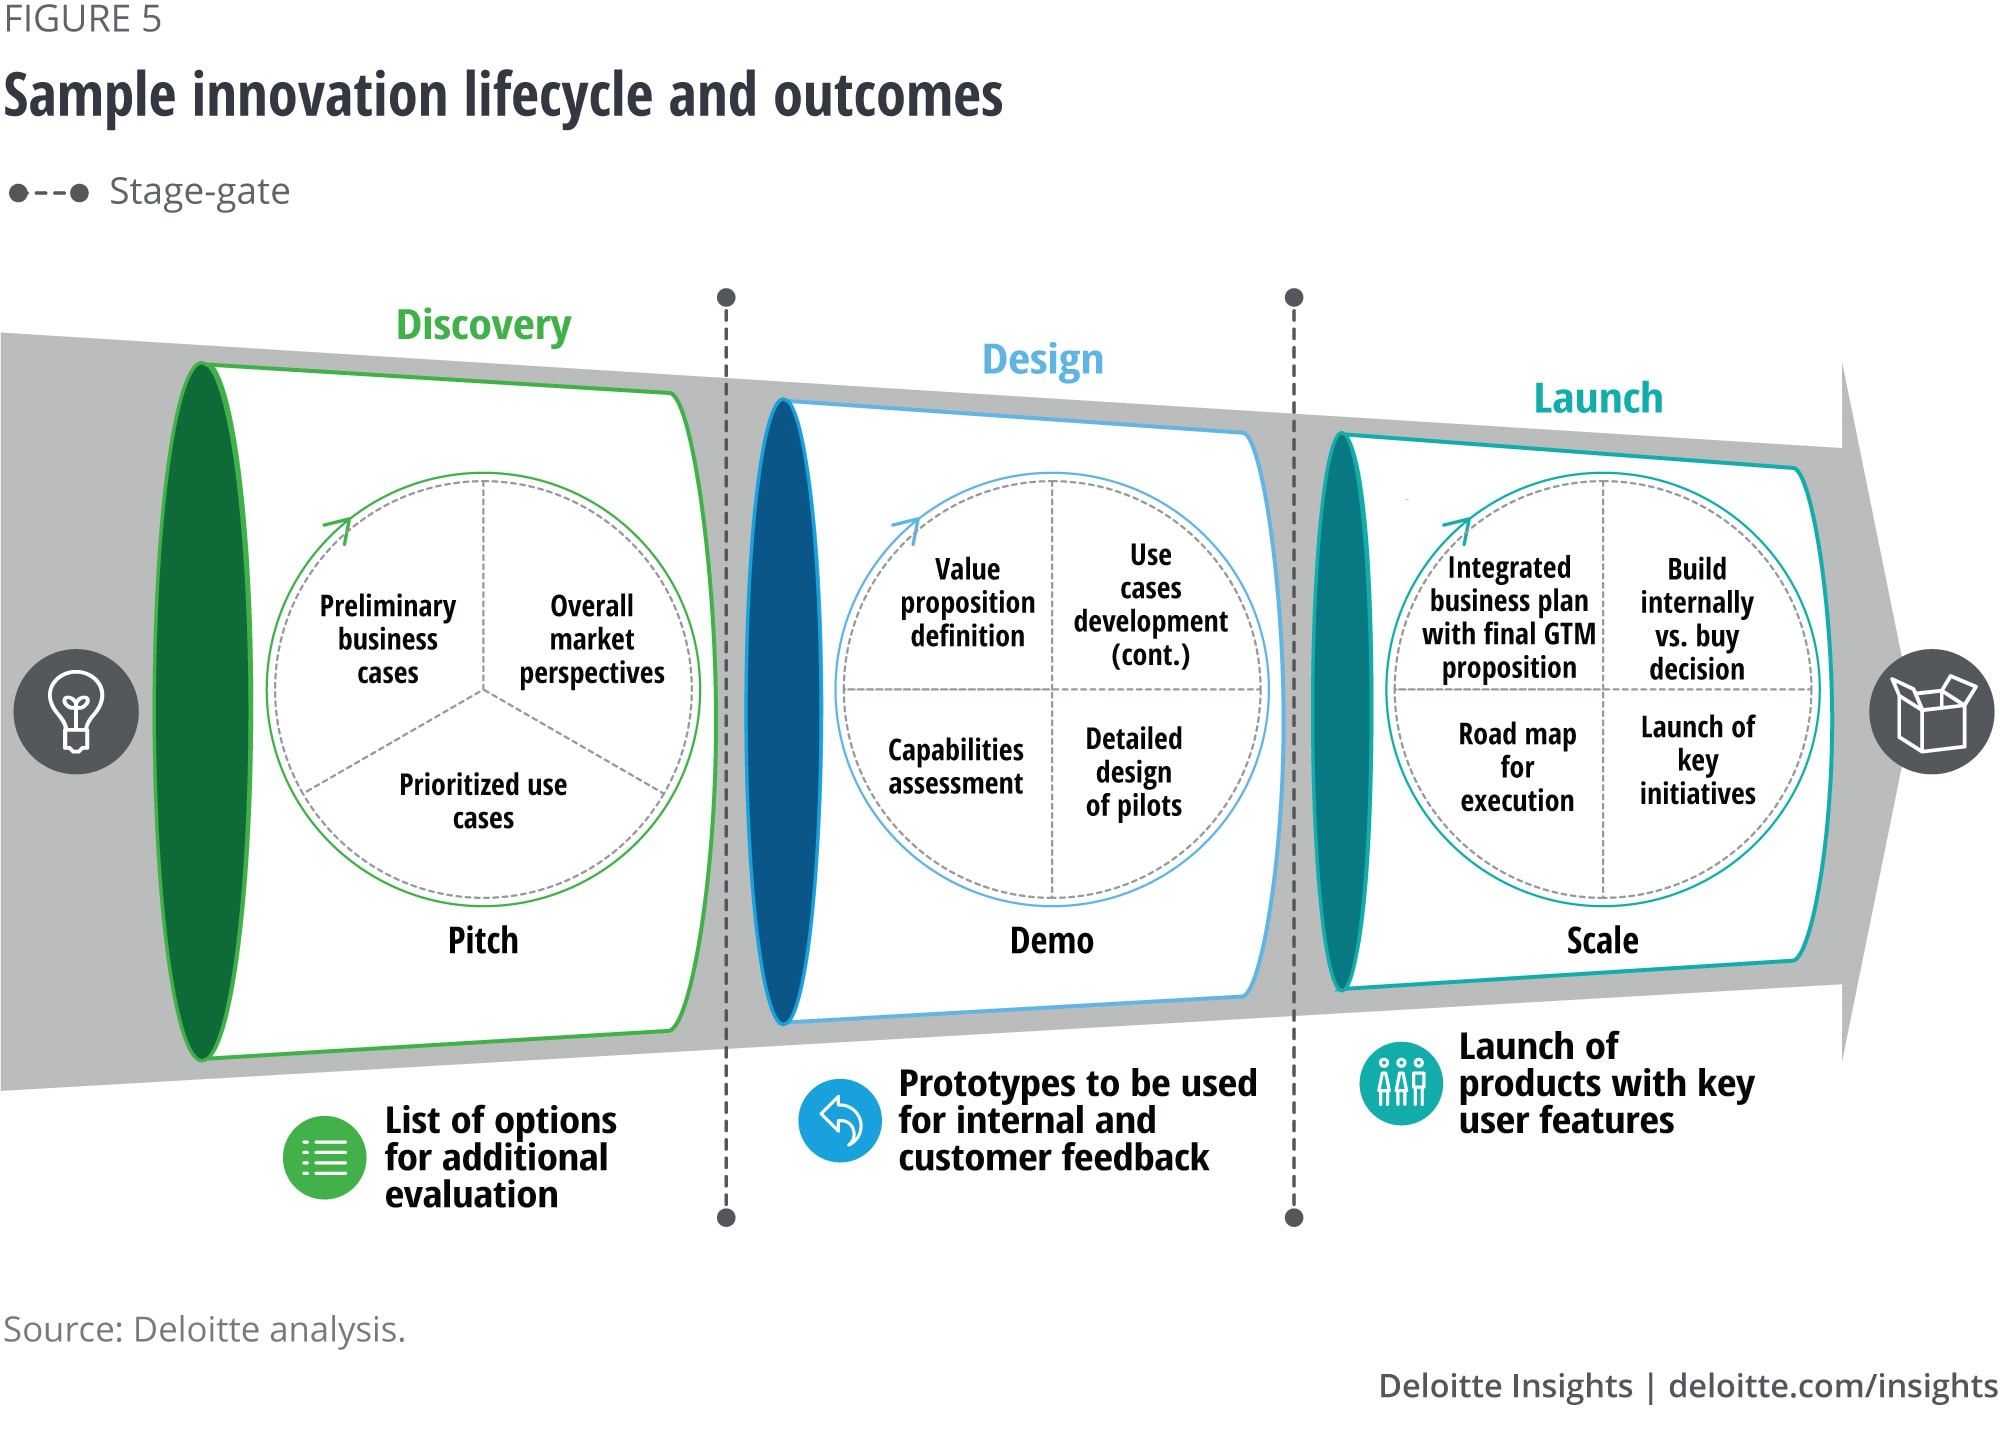 Sample innovation process and deliverables